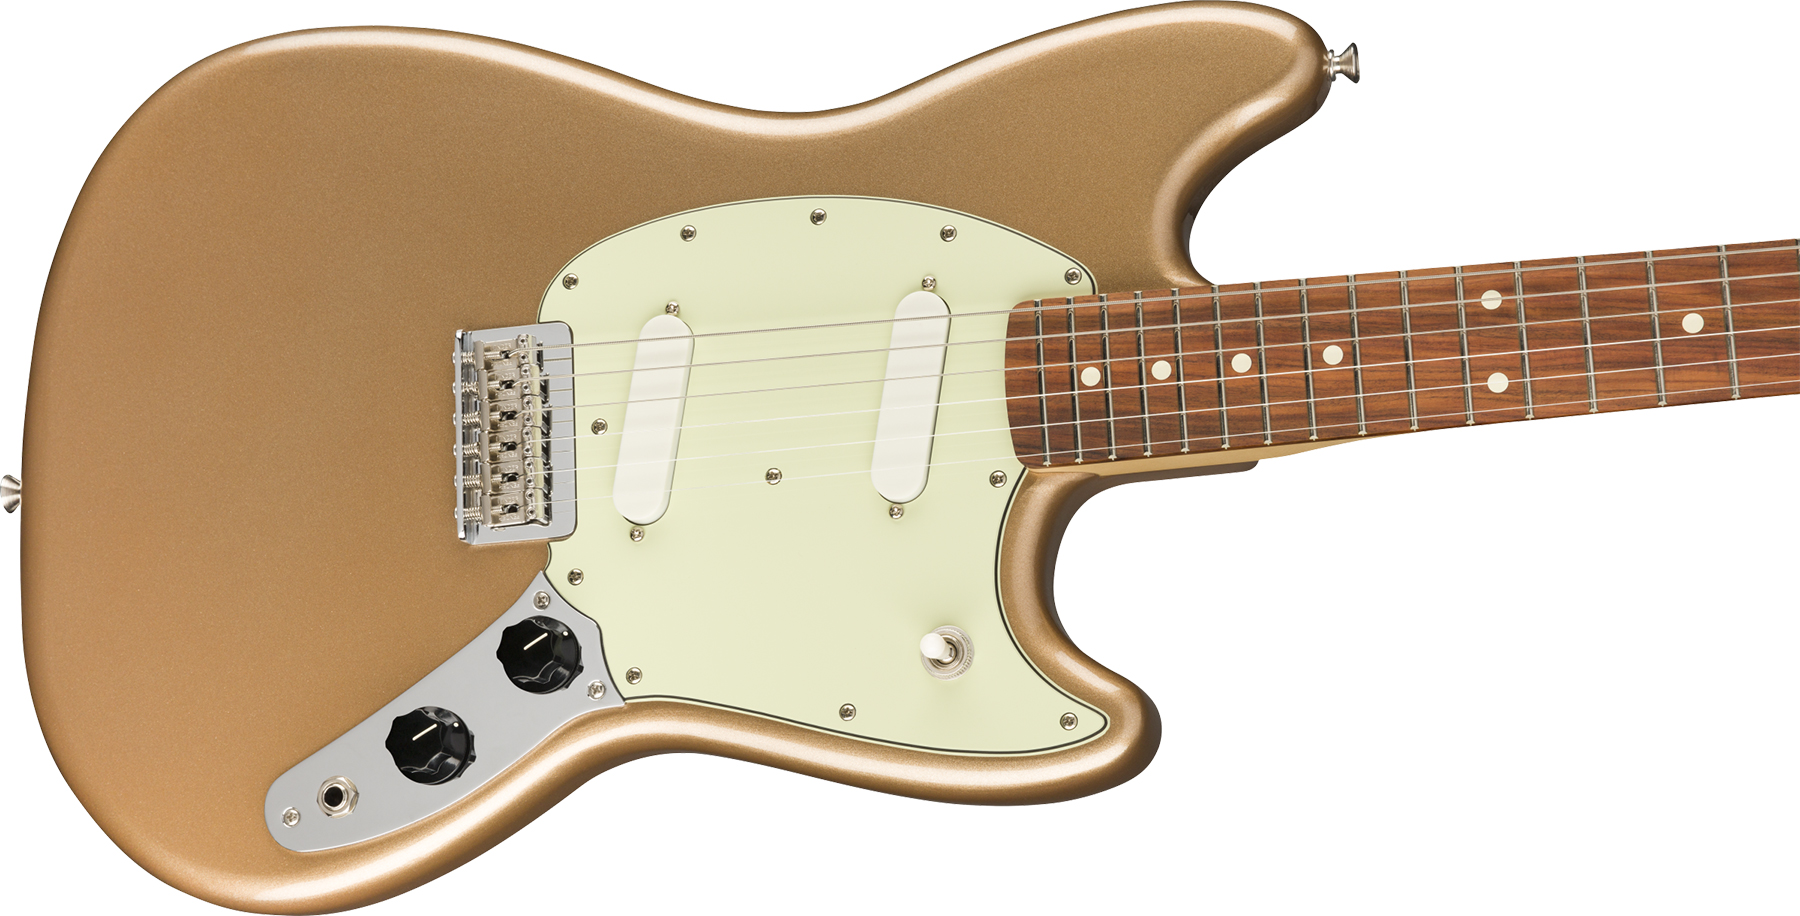 Fender Mustang Player Mex Ht Ss Pf - Firemist Gold - Retro rock electric guitar - Variation 2